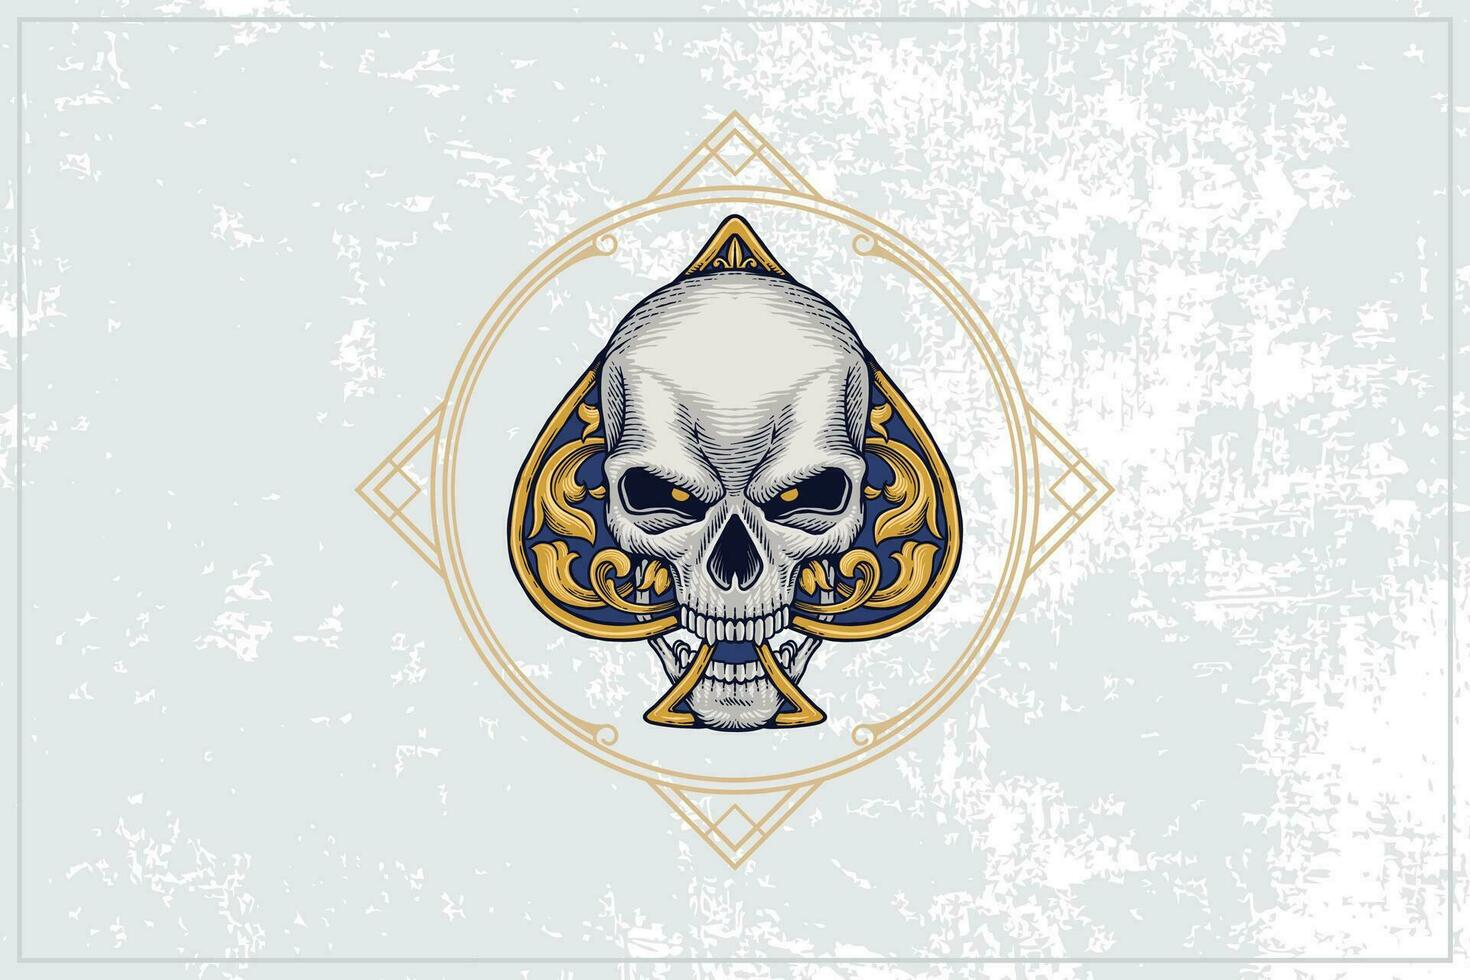 Ace of poker card skull icon with a classic and vintage blue base vector